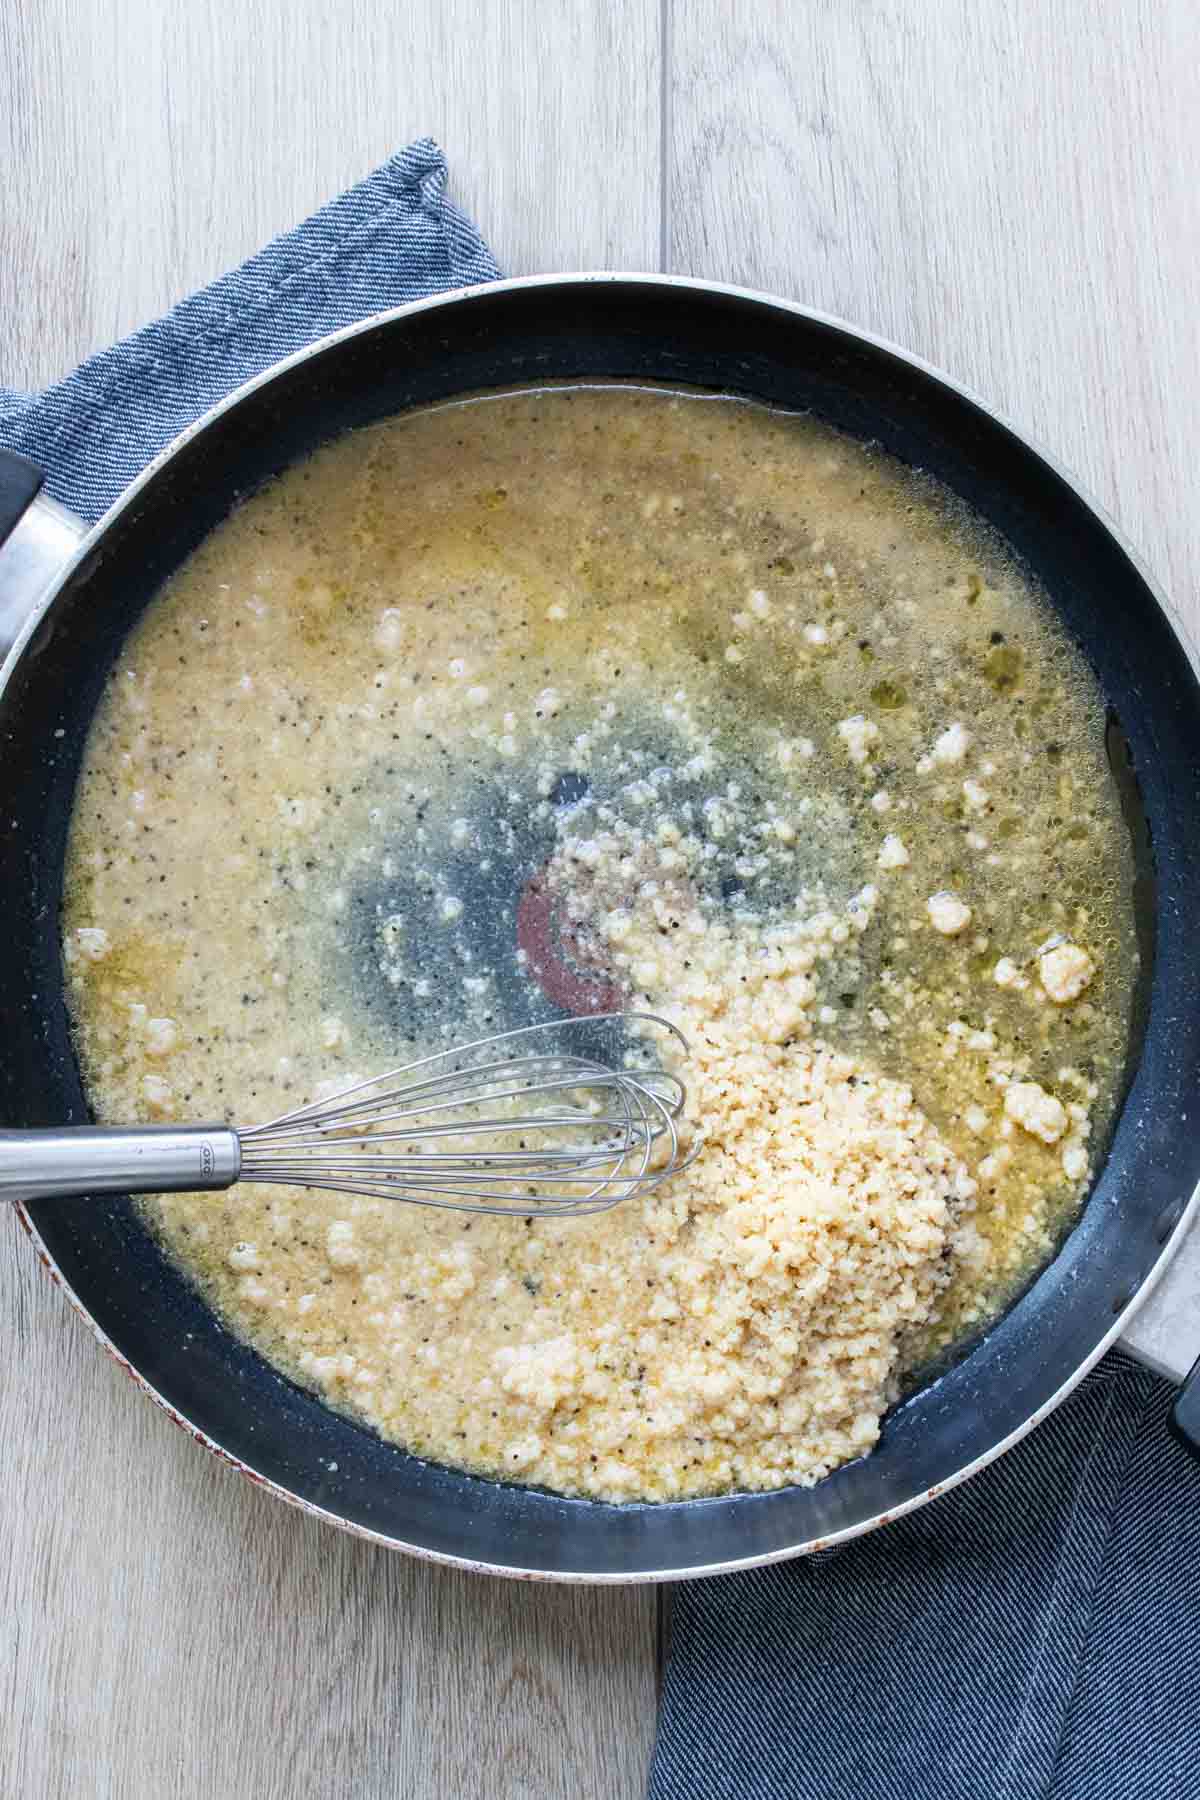 Whisk mixing parmesan into a broth